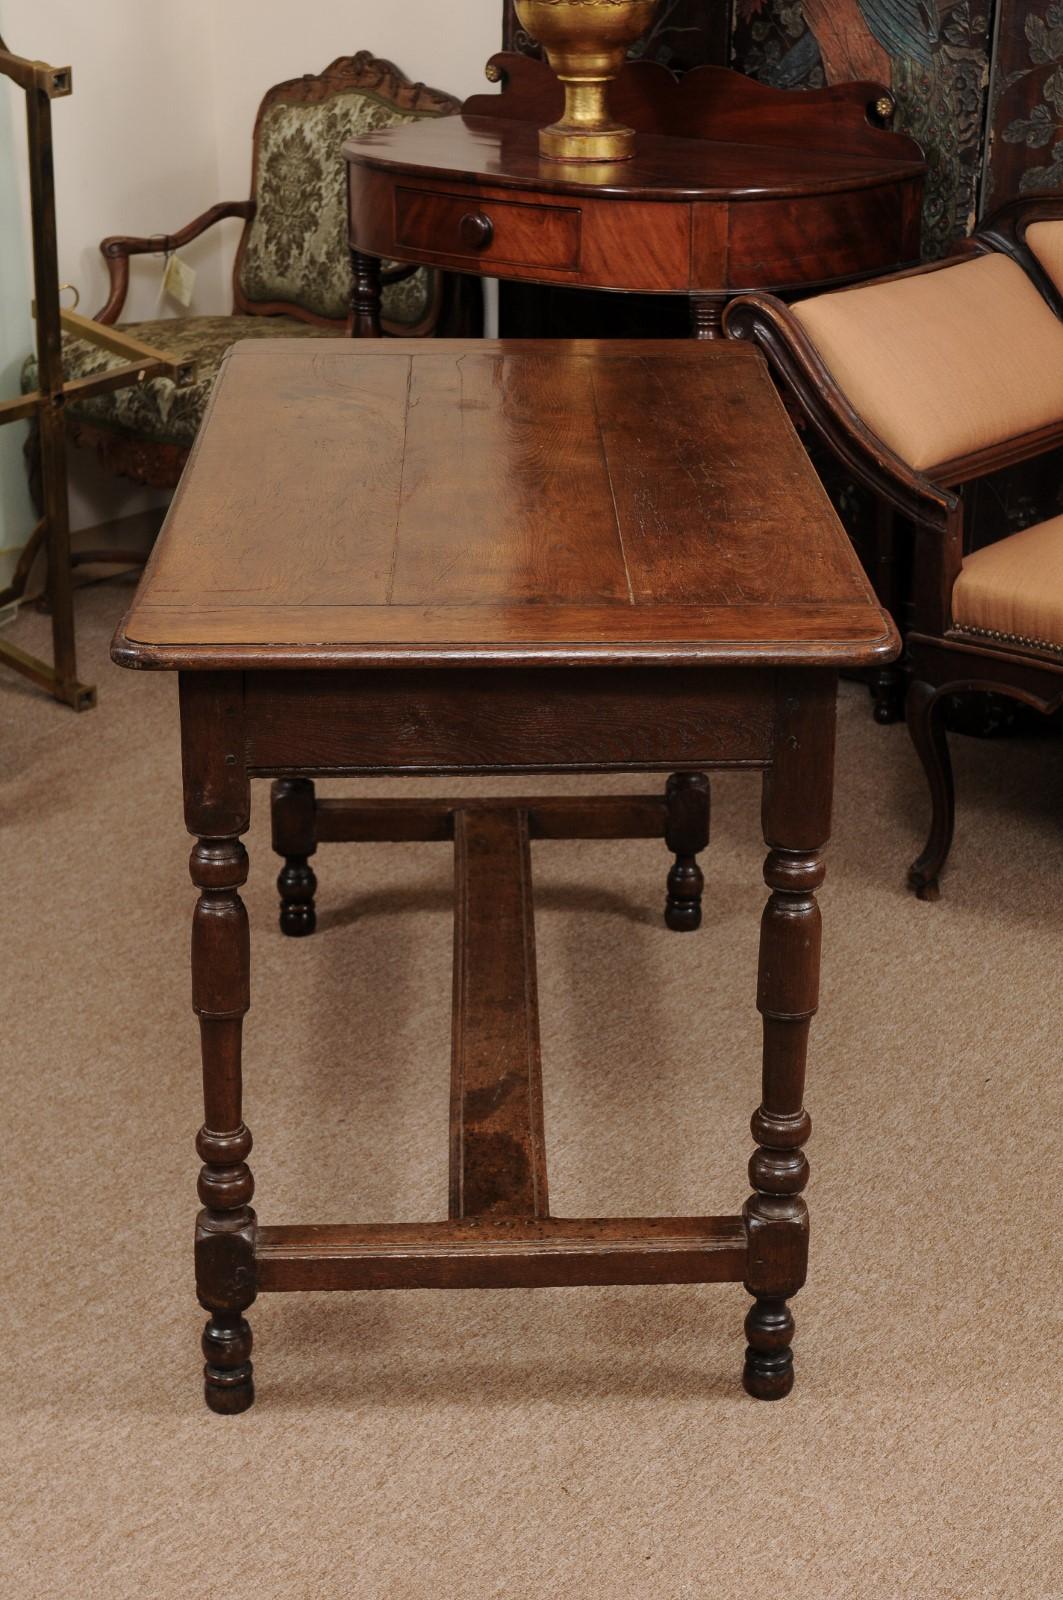 The 19th century English oak writing table with one-drawer, turned legs and stretcher.